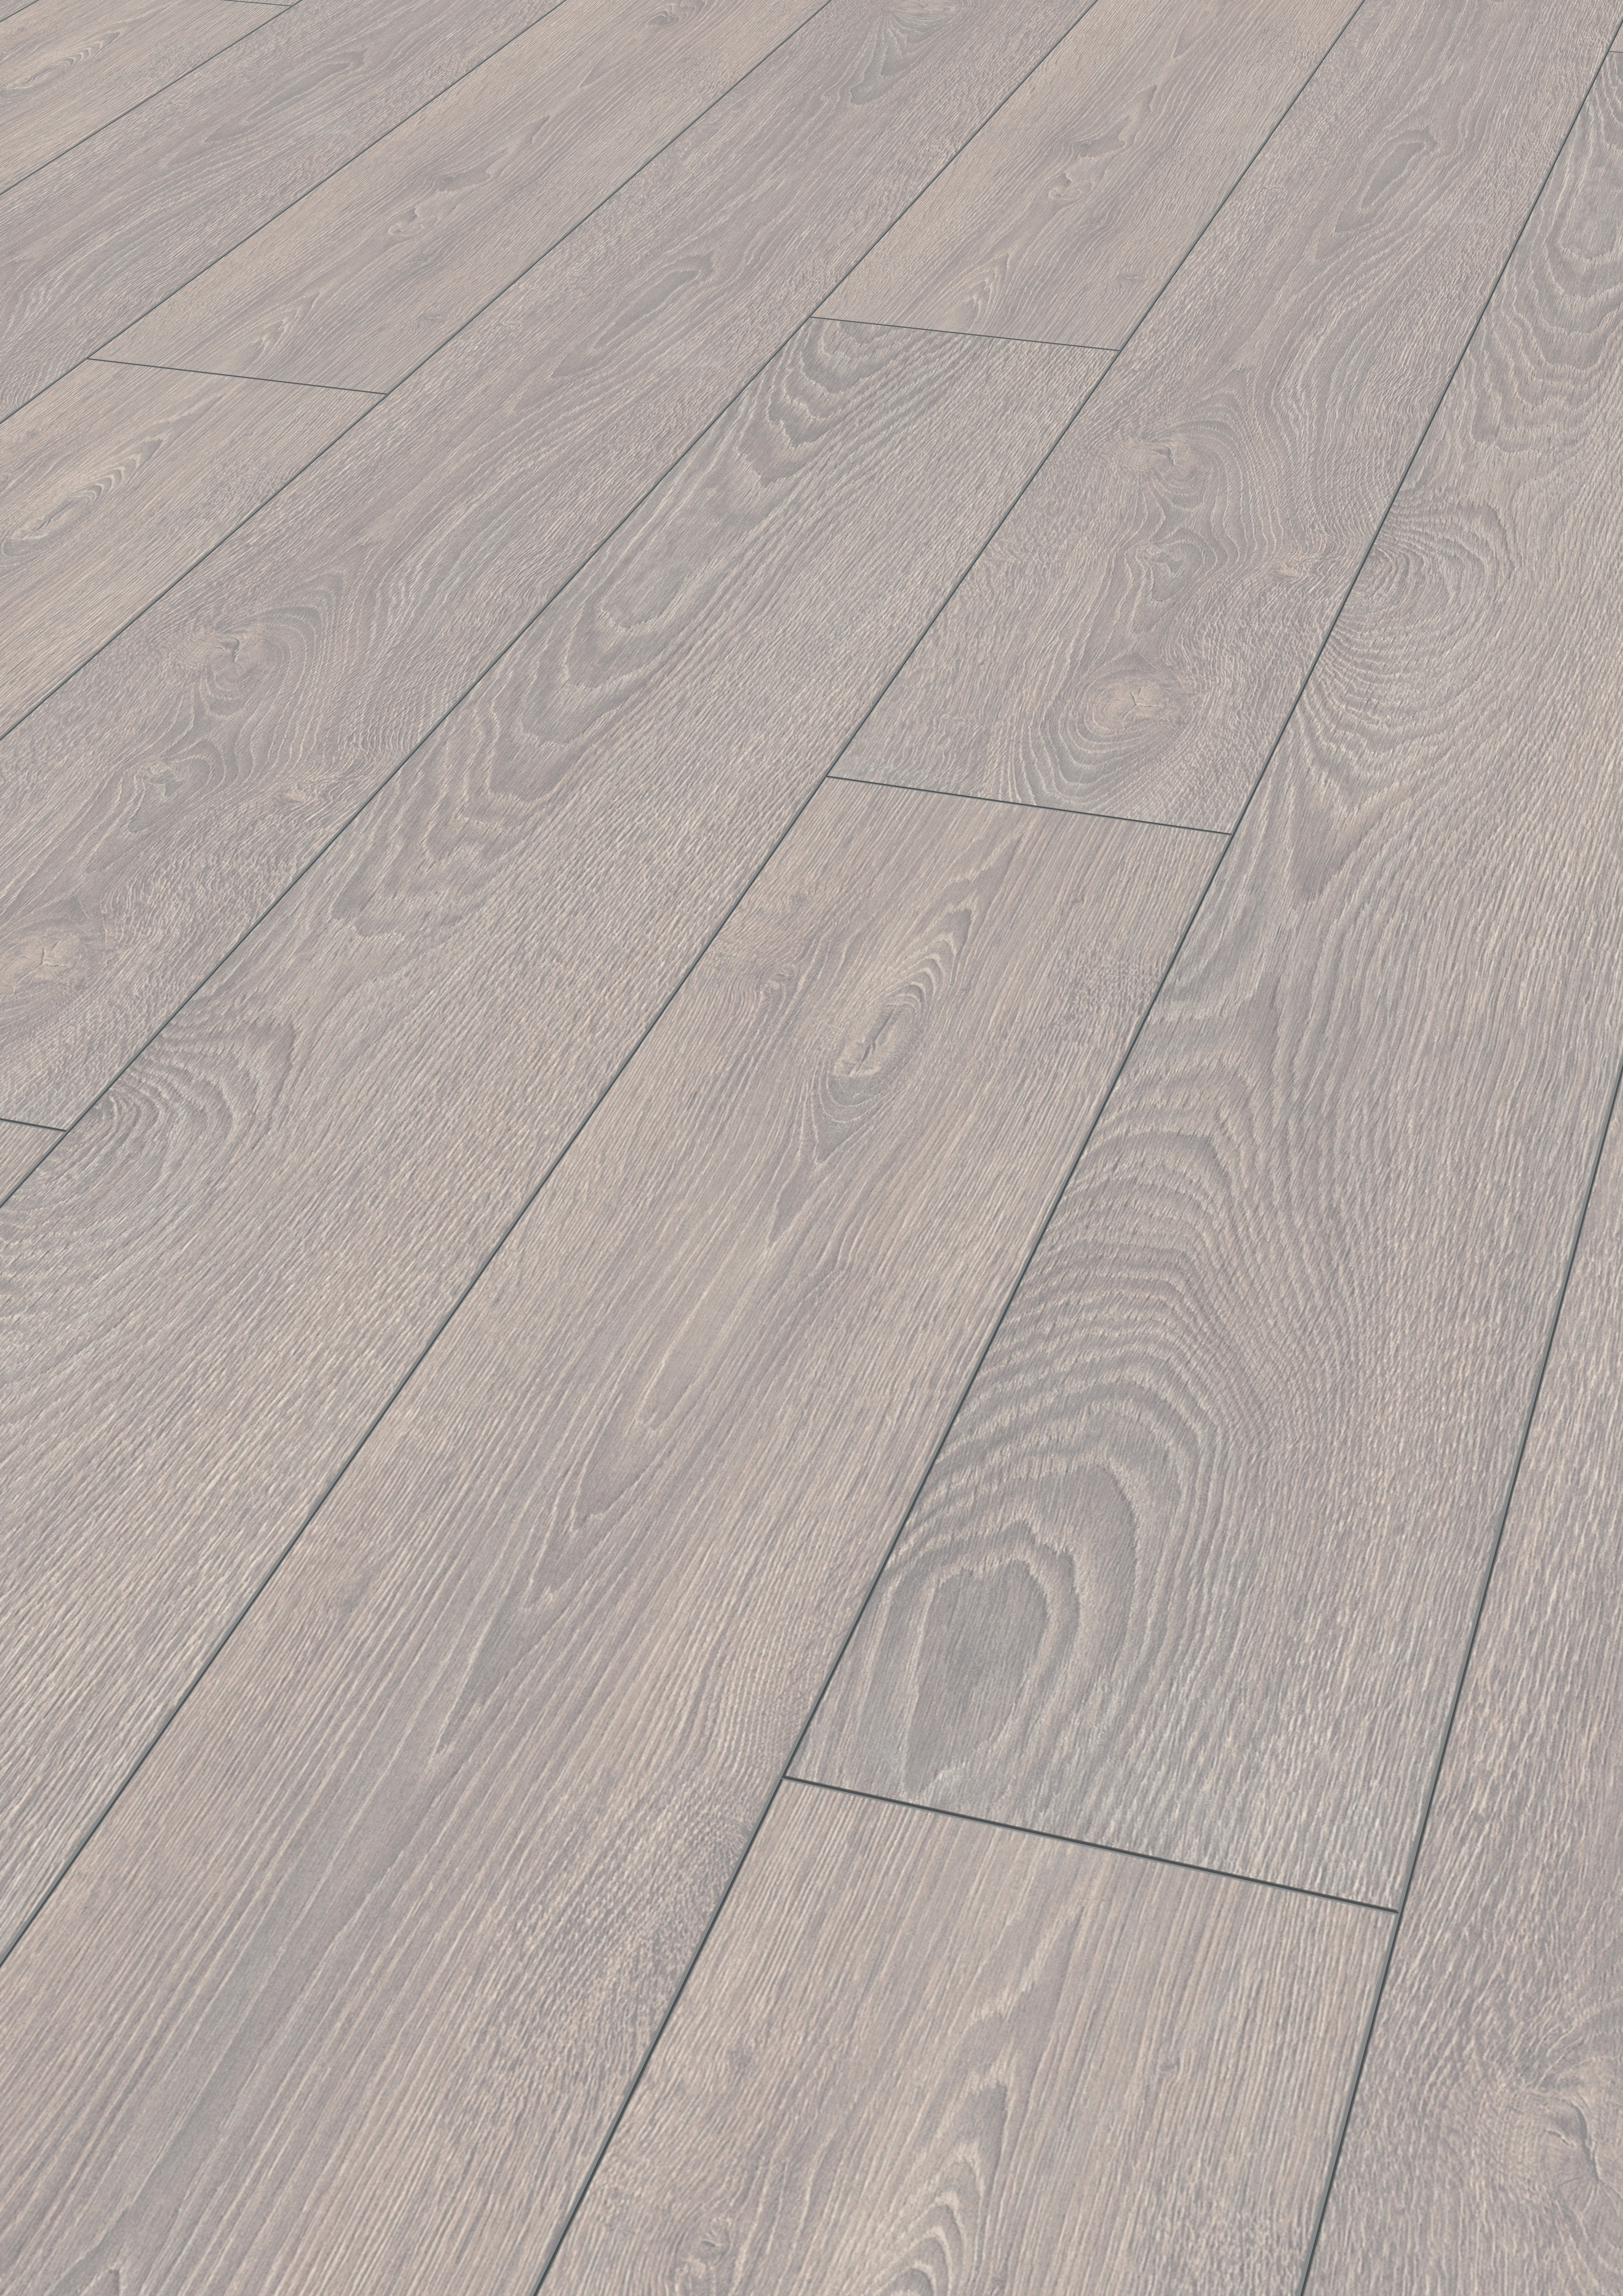 11 Great Bc Hardwood Floor Co Ltd 2024 free download bc hardwood floor co ltd of mammut laminate flooring in country house plank style kronotex throughout download picture